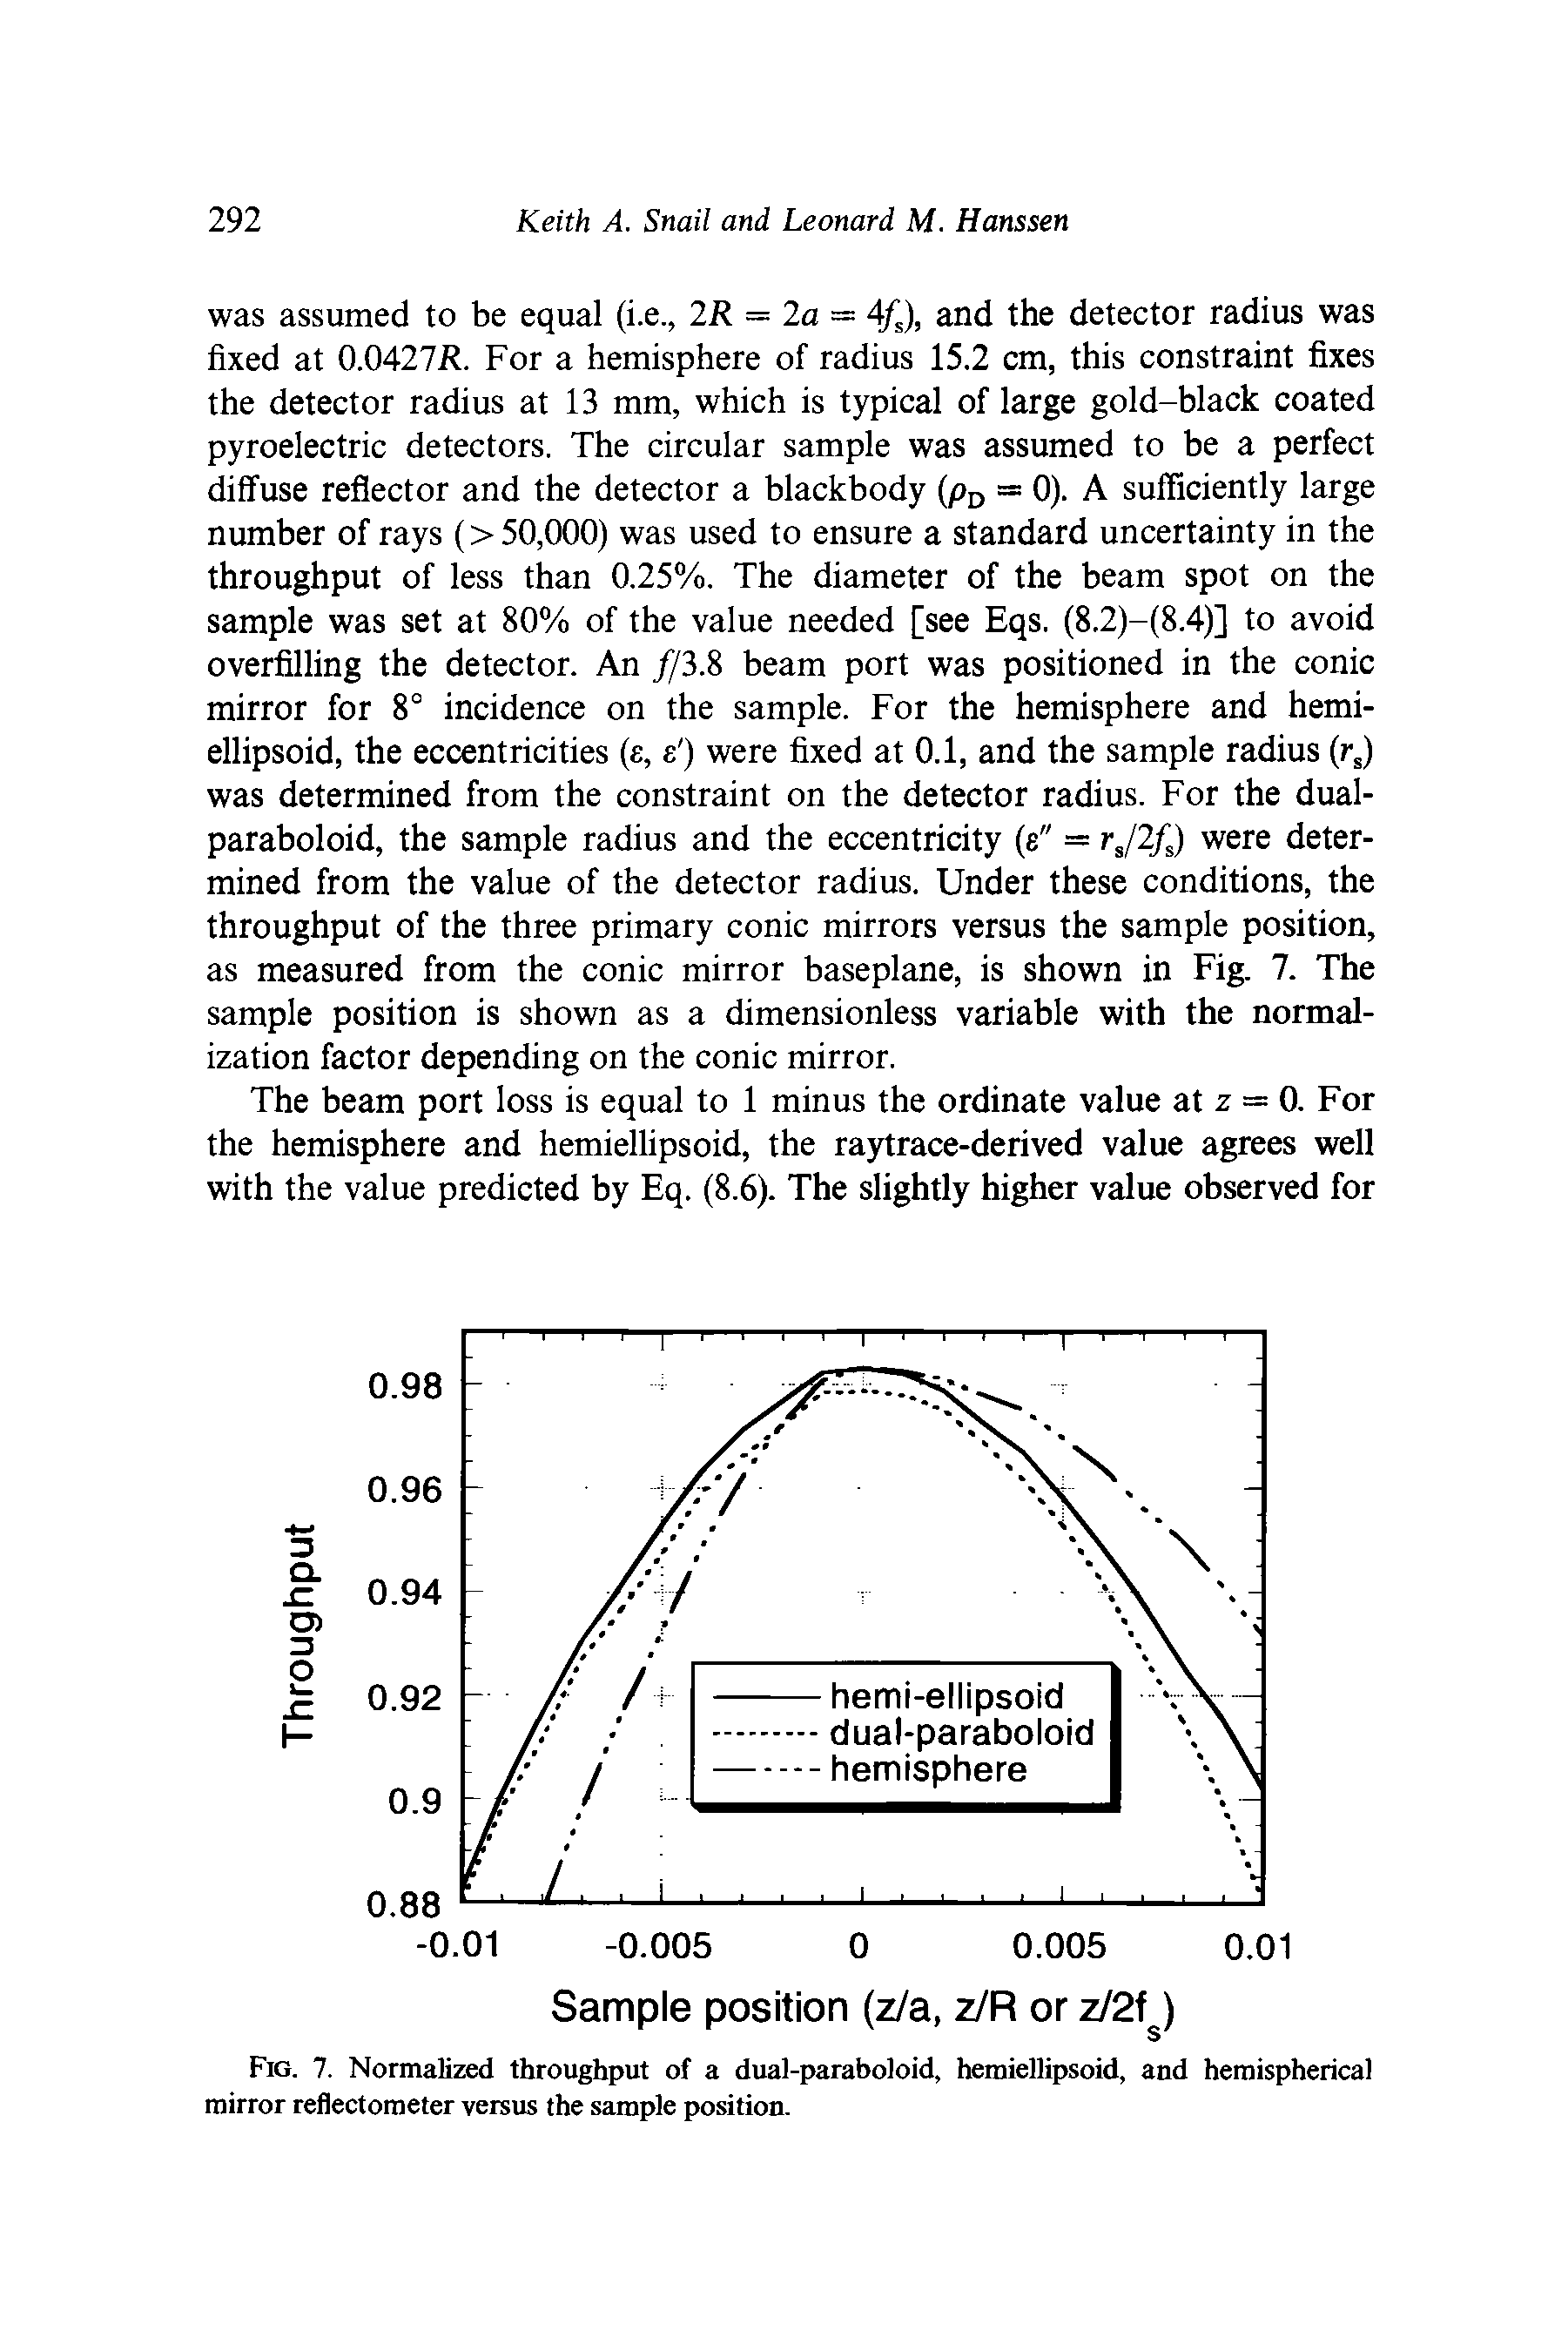 Fig. 7. Normalized throughput of a dual-paraboloid, hemiellipsoid, and hemispherical mirror reflectoraeter versus the sample position.